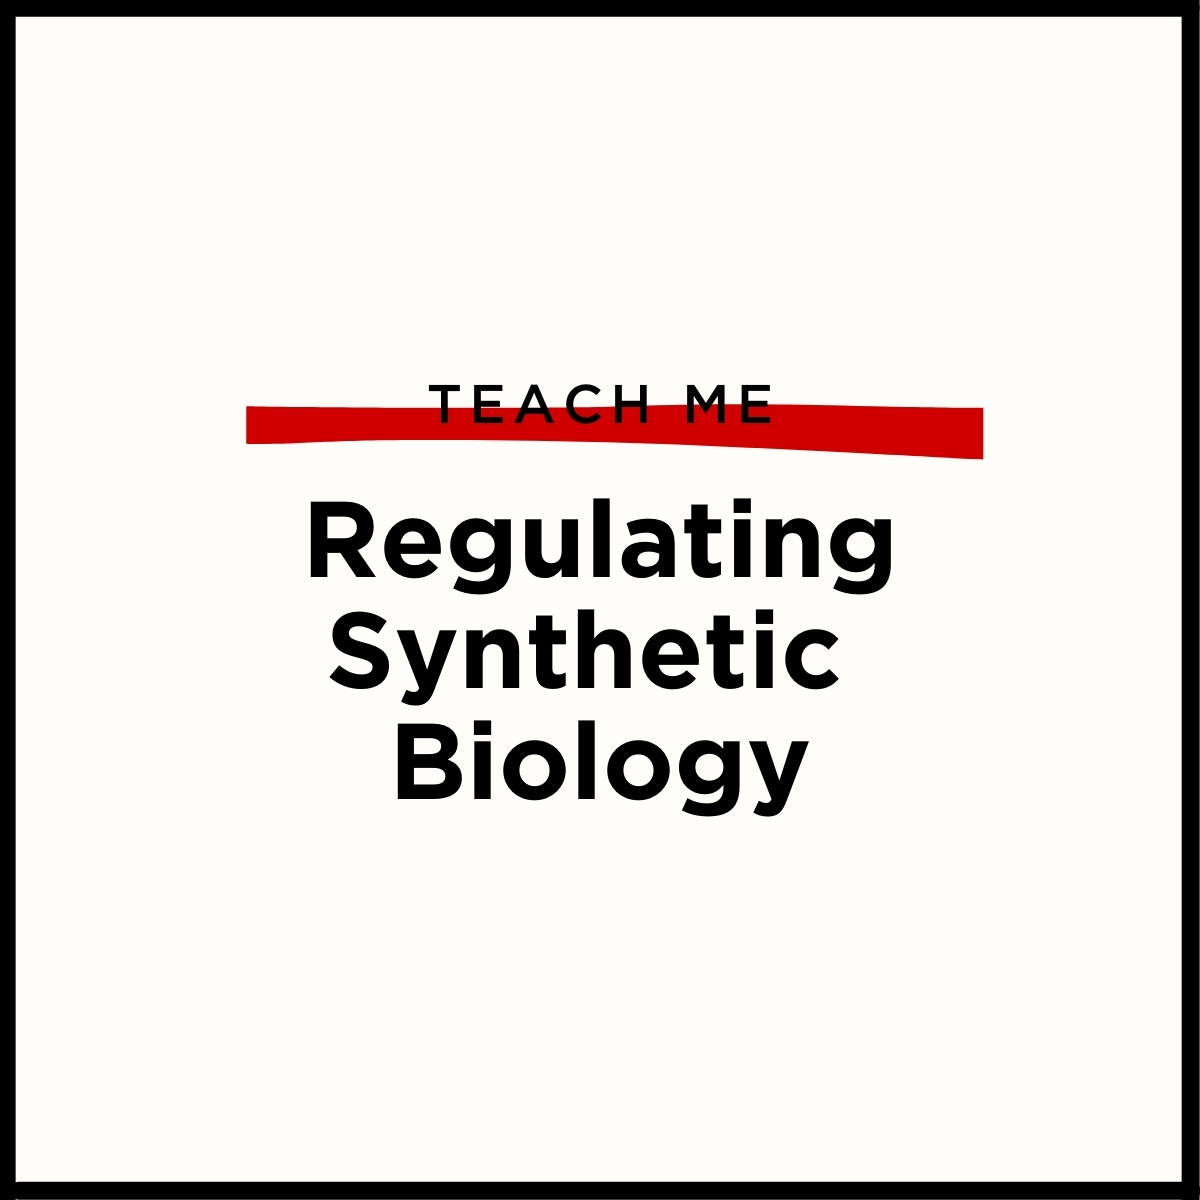 Teach Me, Regulating Synthetic Biology